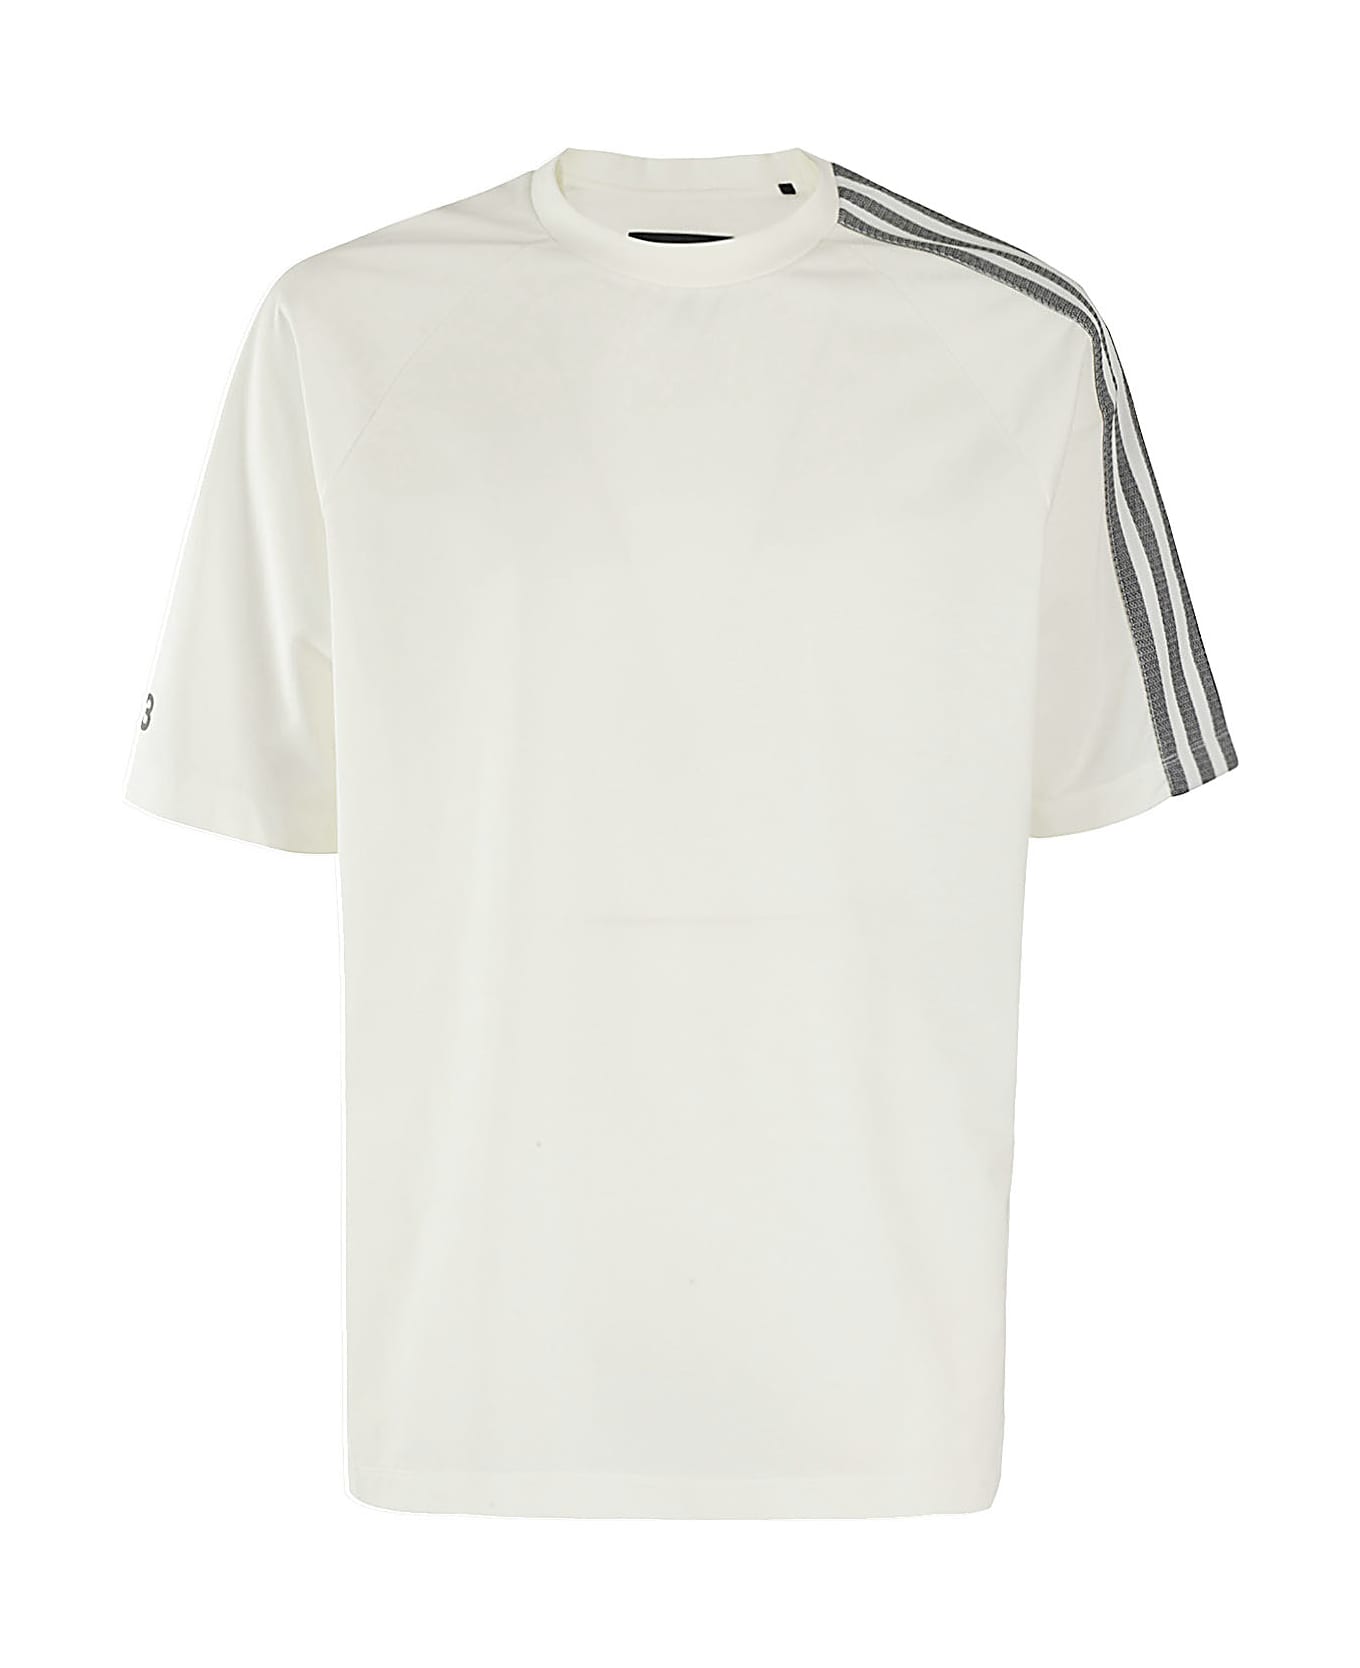 Y-3 3s Ss Tee - White